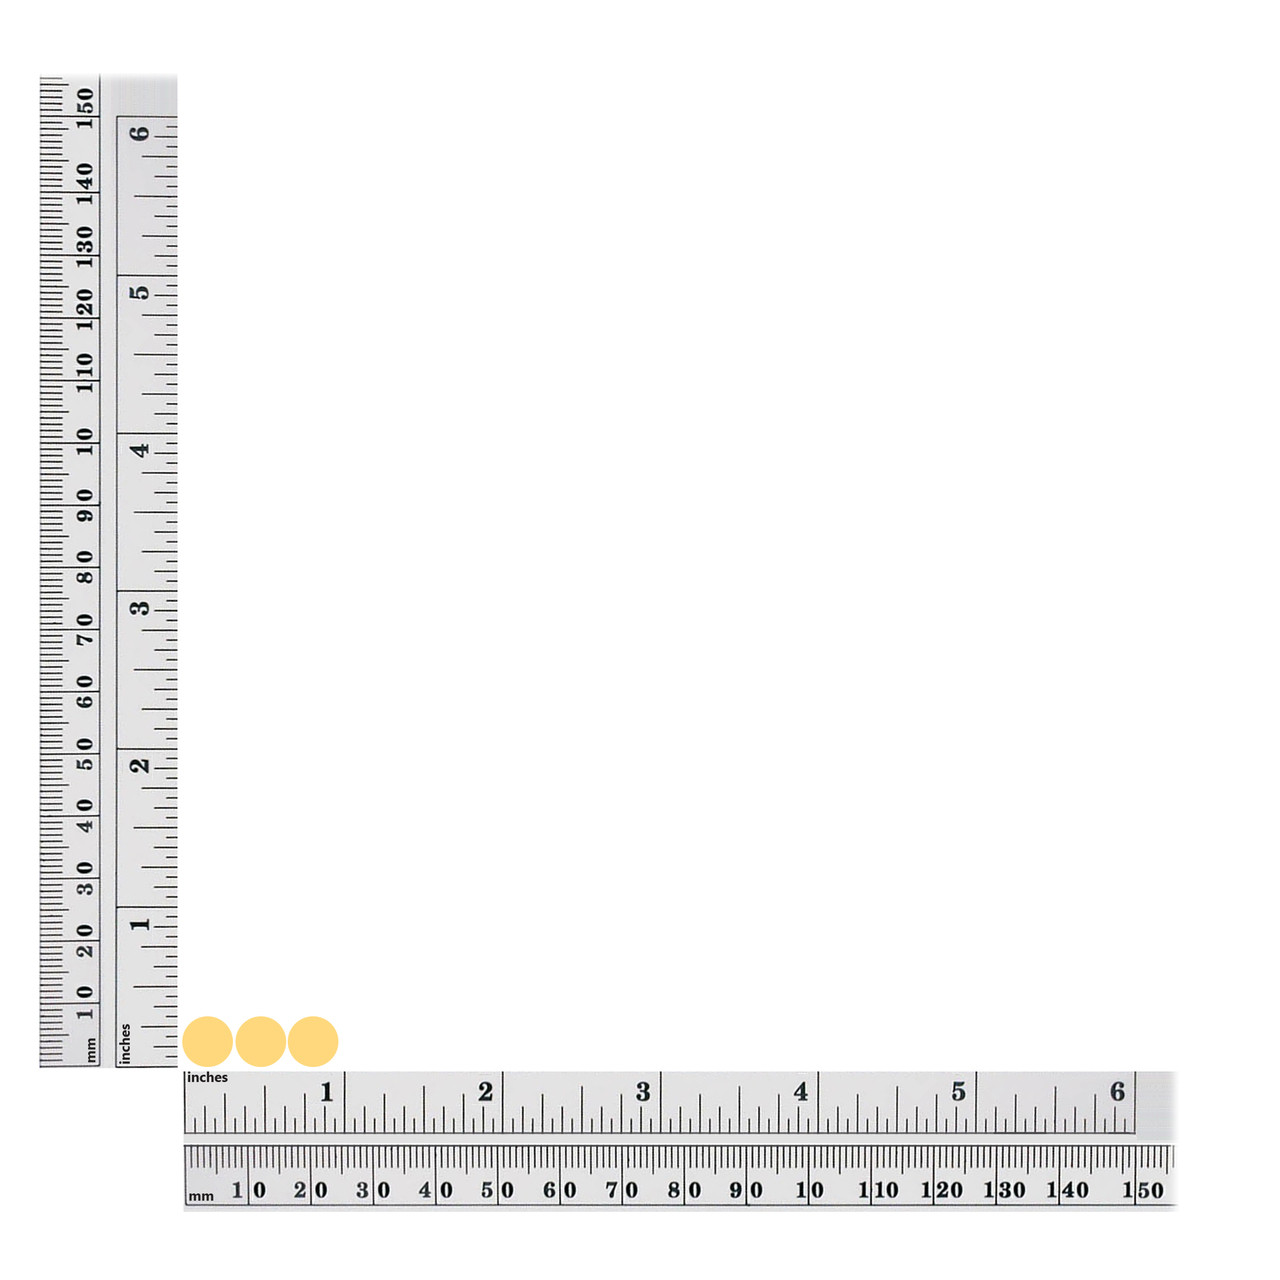 8mm sequin size chart